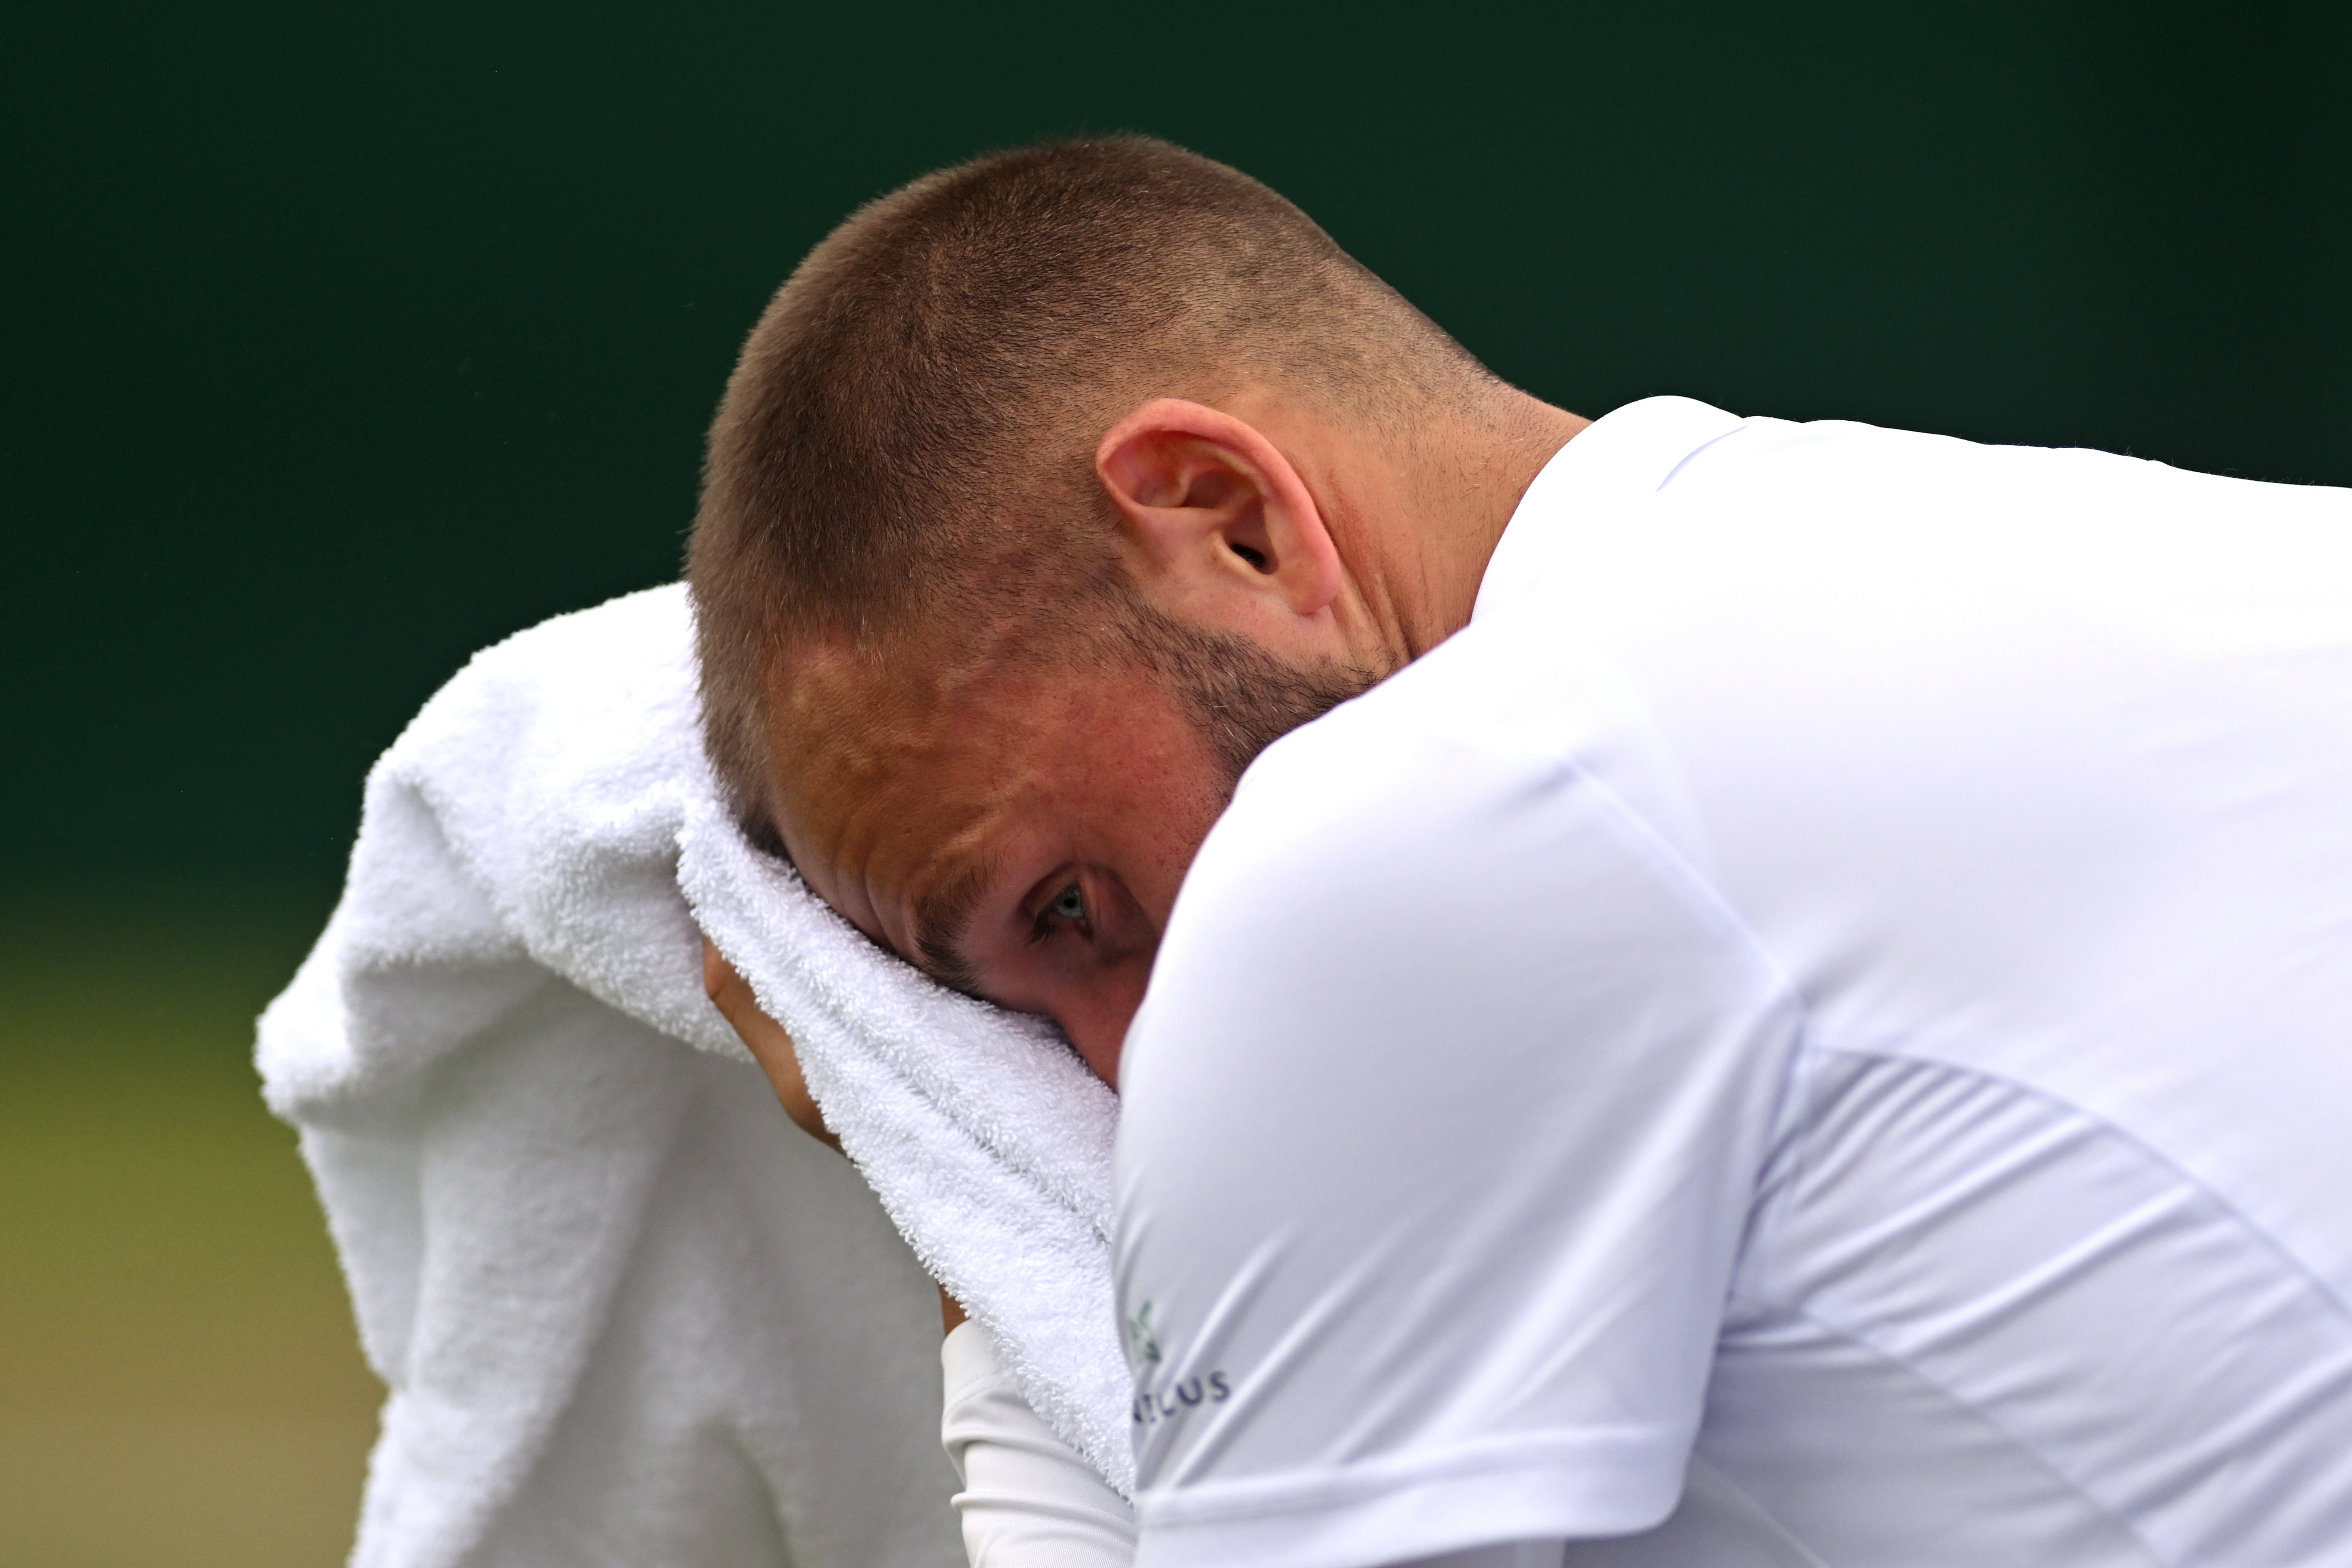 Dan Evans was beaten by Alejandro Tabilo in the first round of Wimbledon